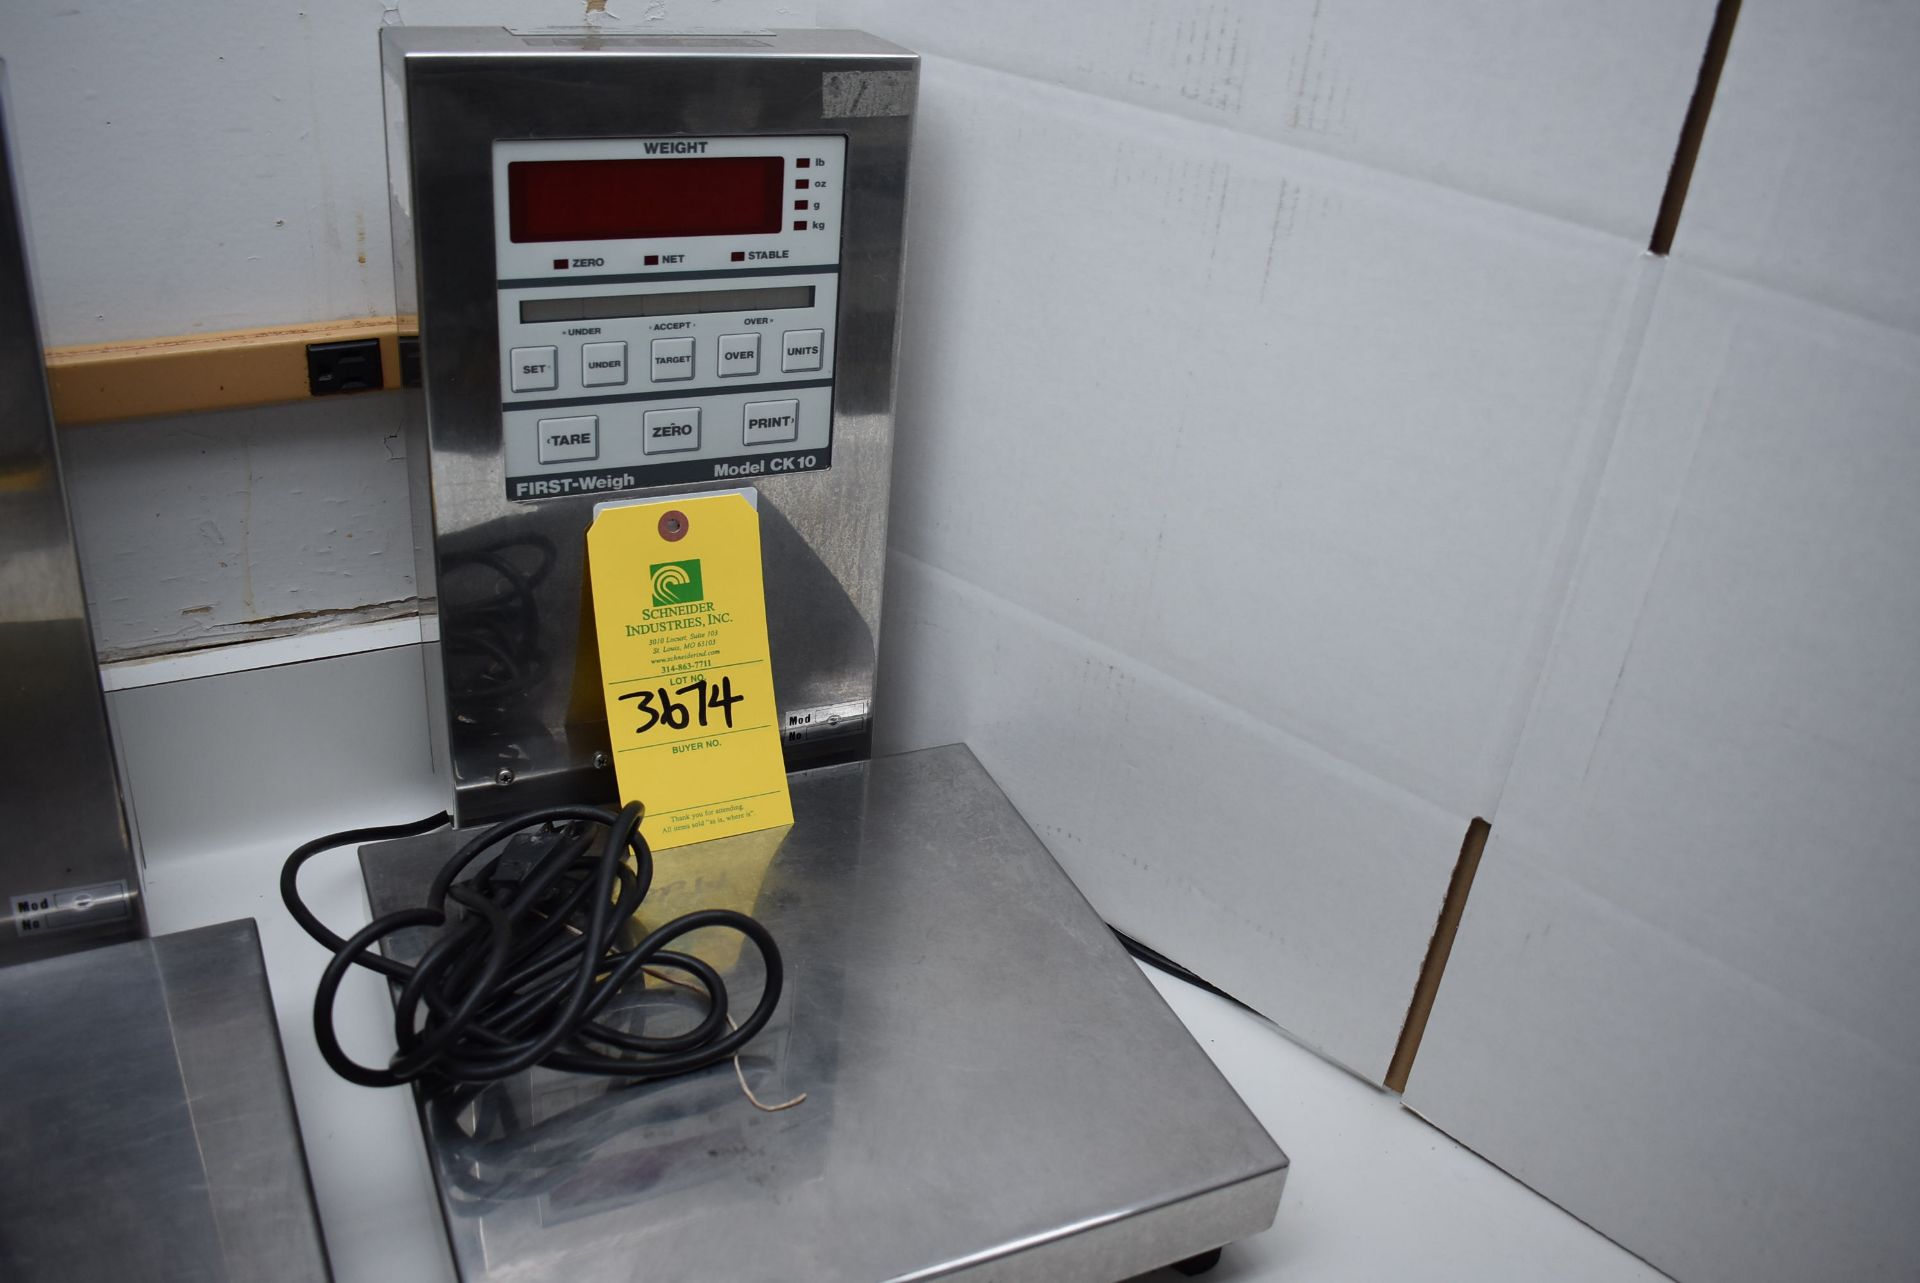 First Weigh Model #CK10-1203 Digital Bench Scale, RIGGING FEE: $15